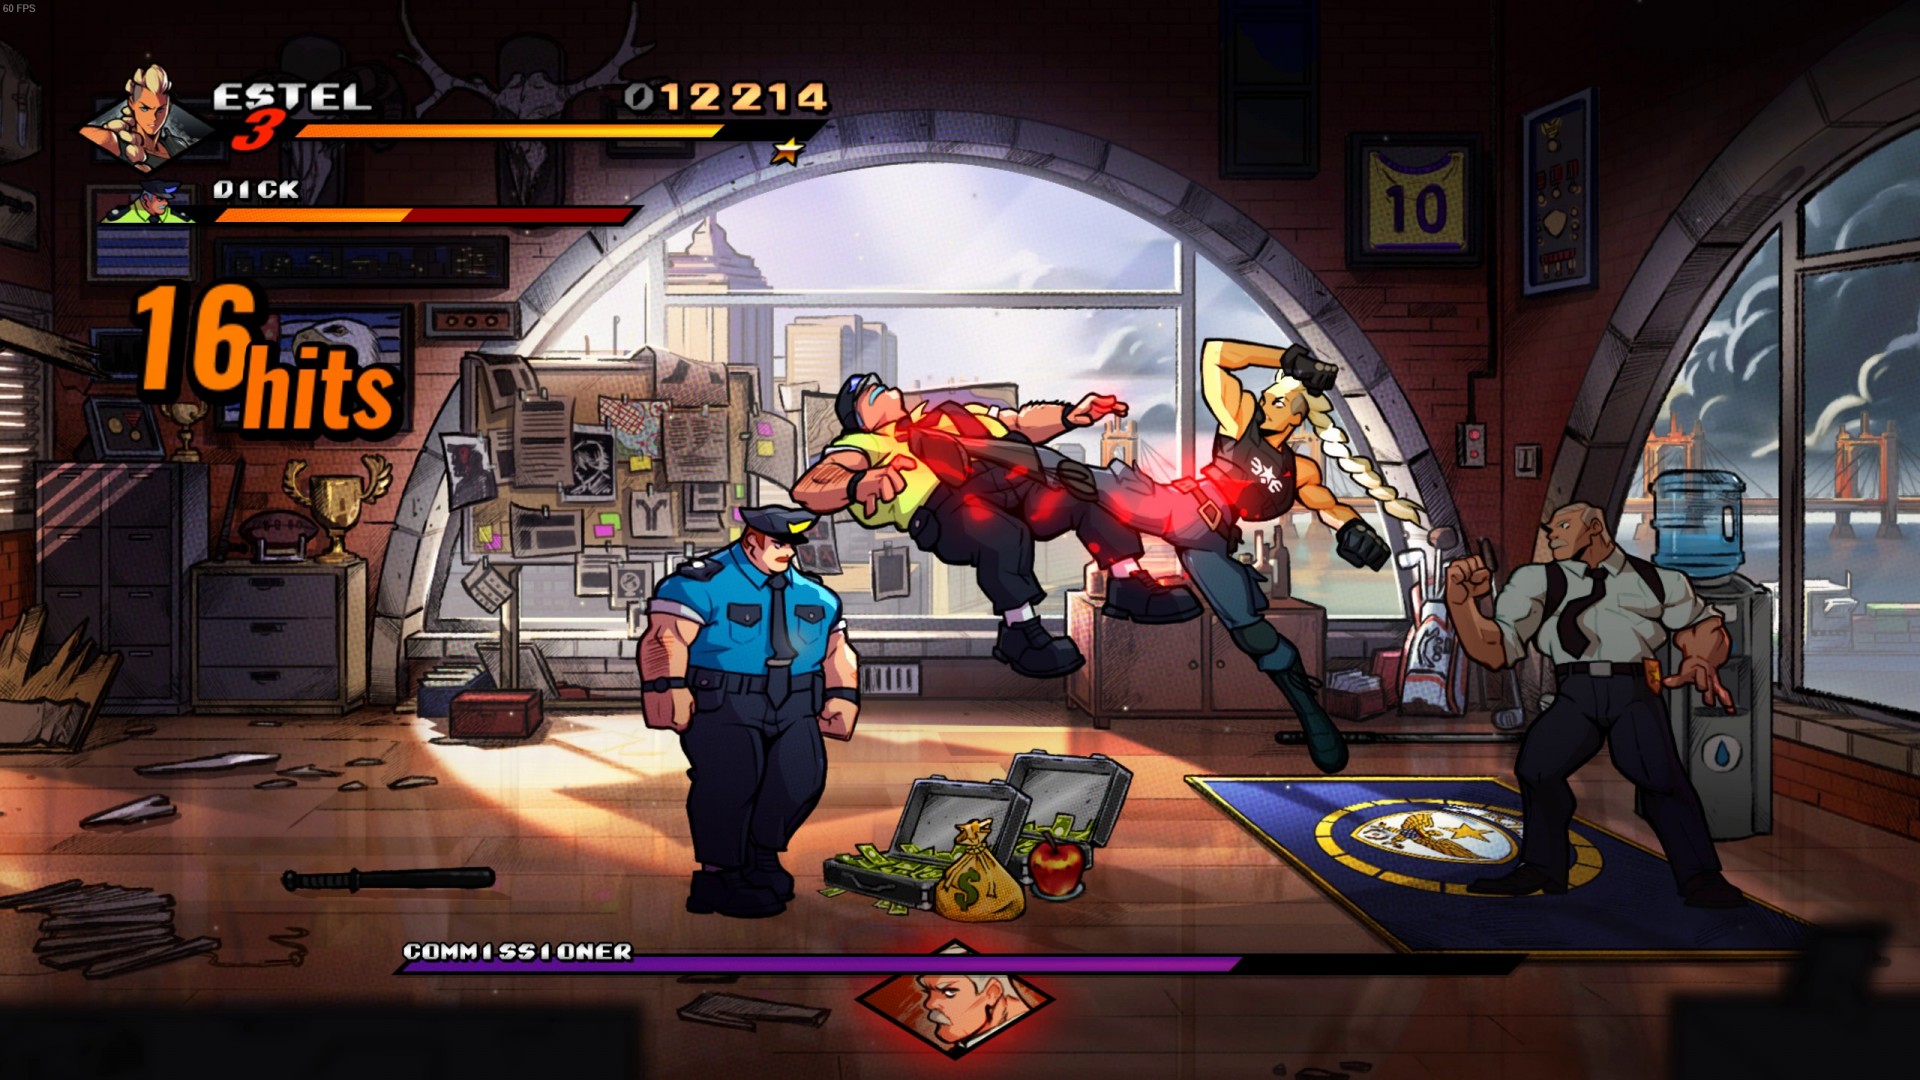 Streets of Rage 4 Mr. X Nightmare: Everything you love about old school  games